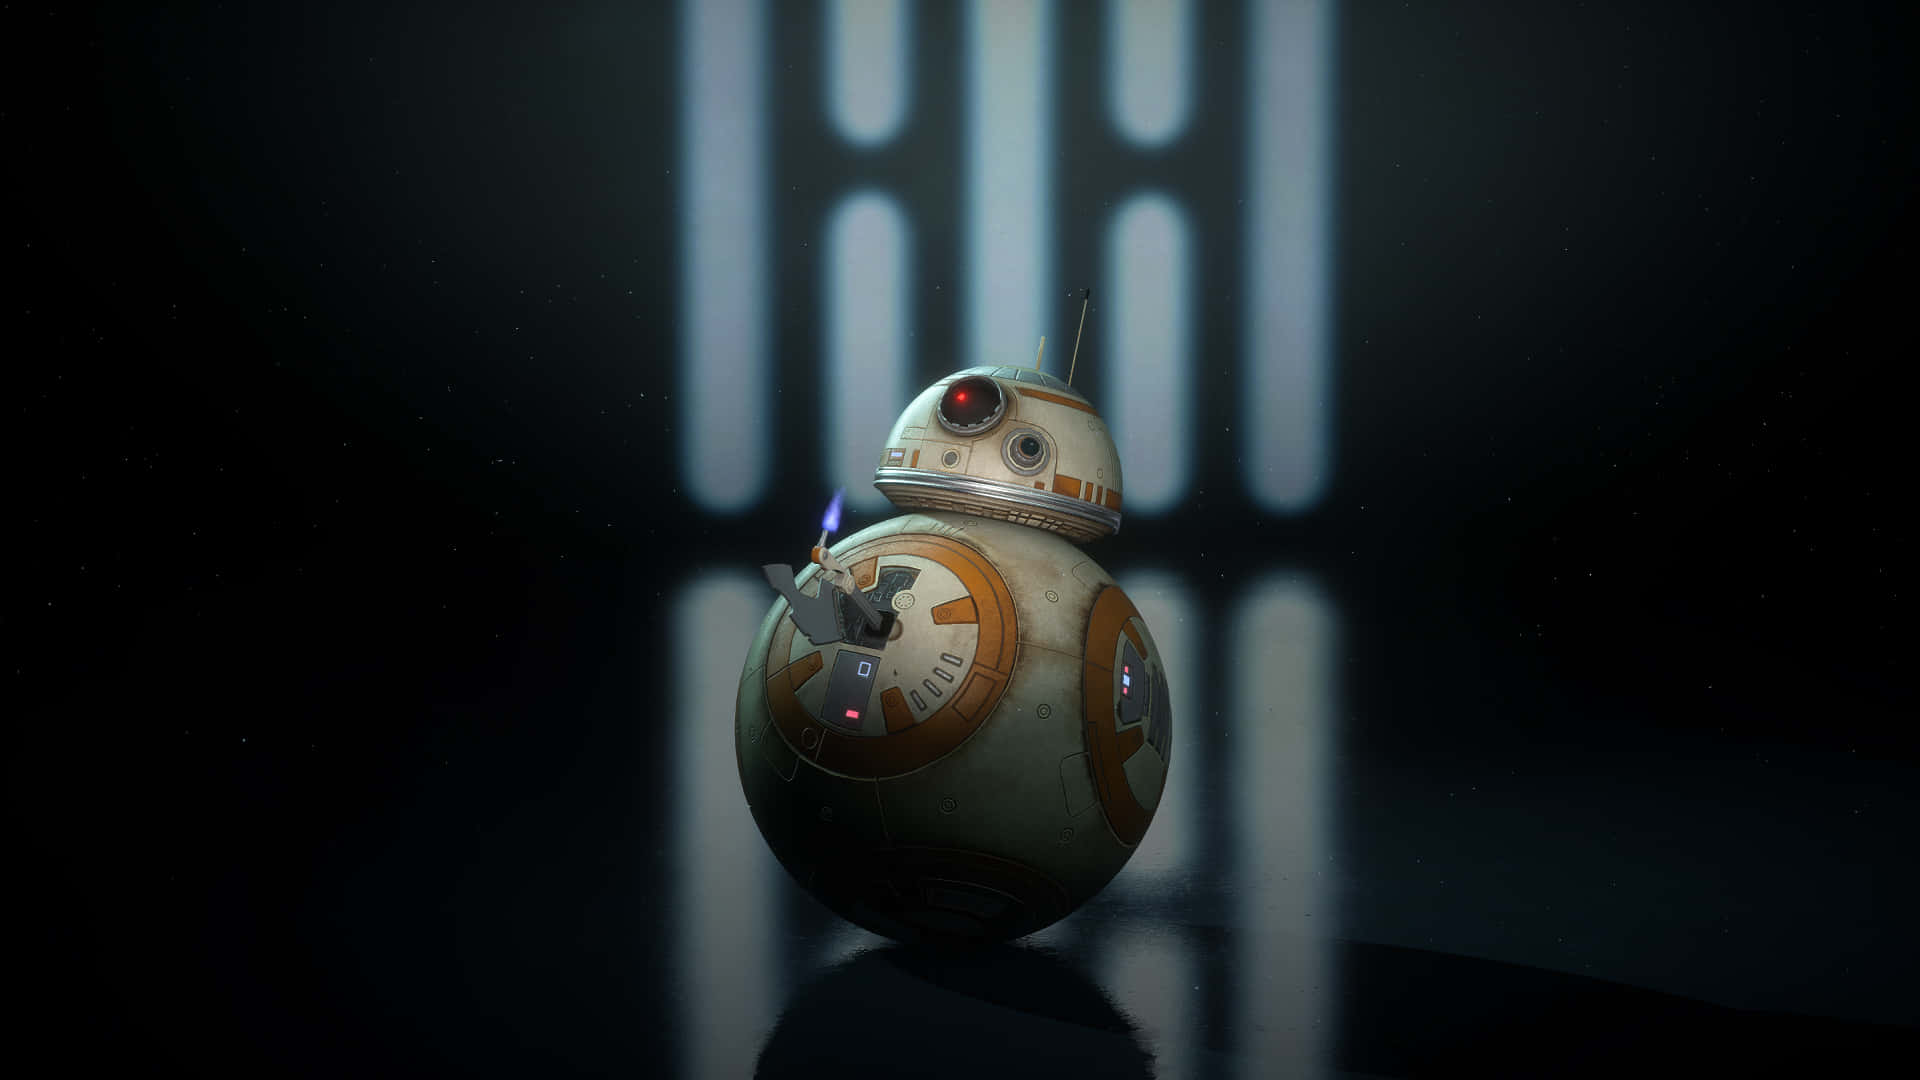 BB-8, the loveable droid from Star Wars. Wallpaper